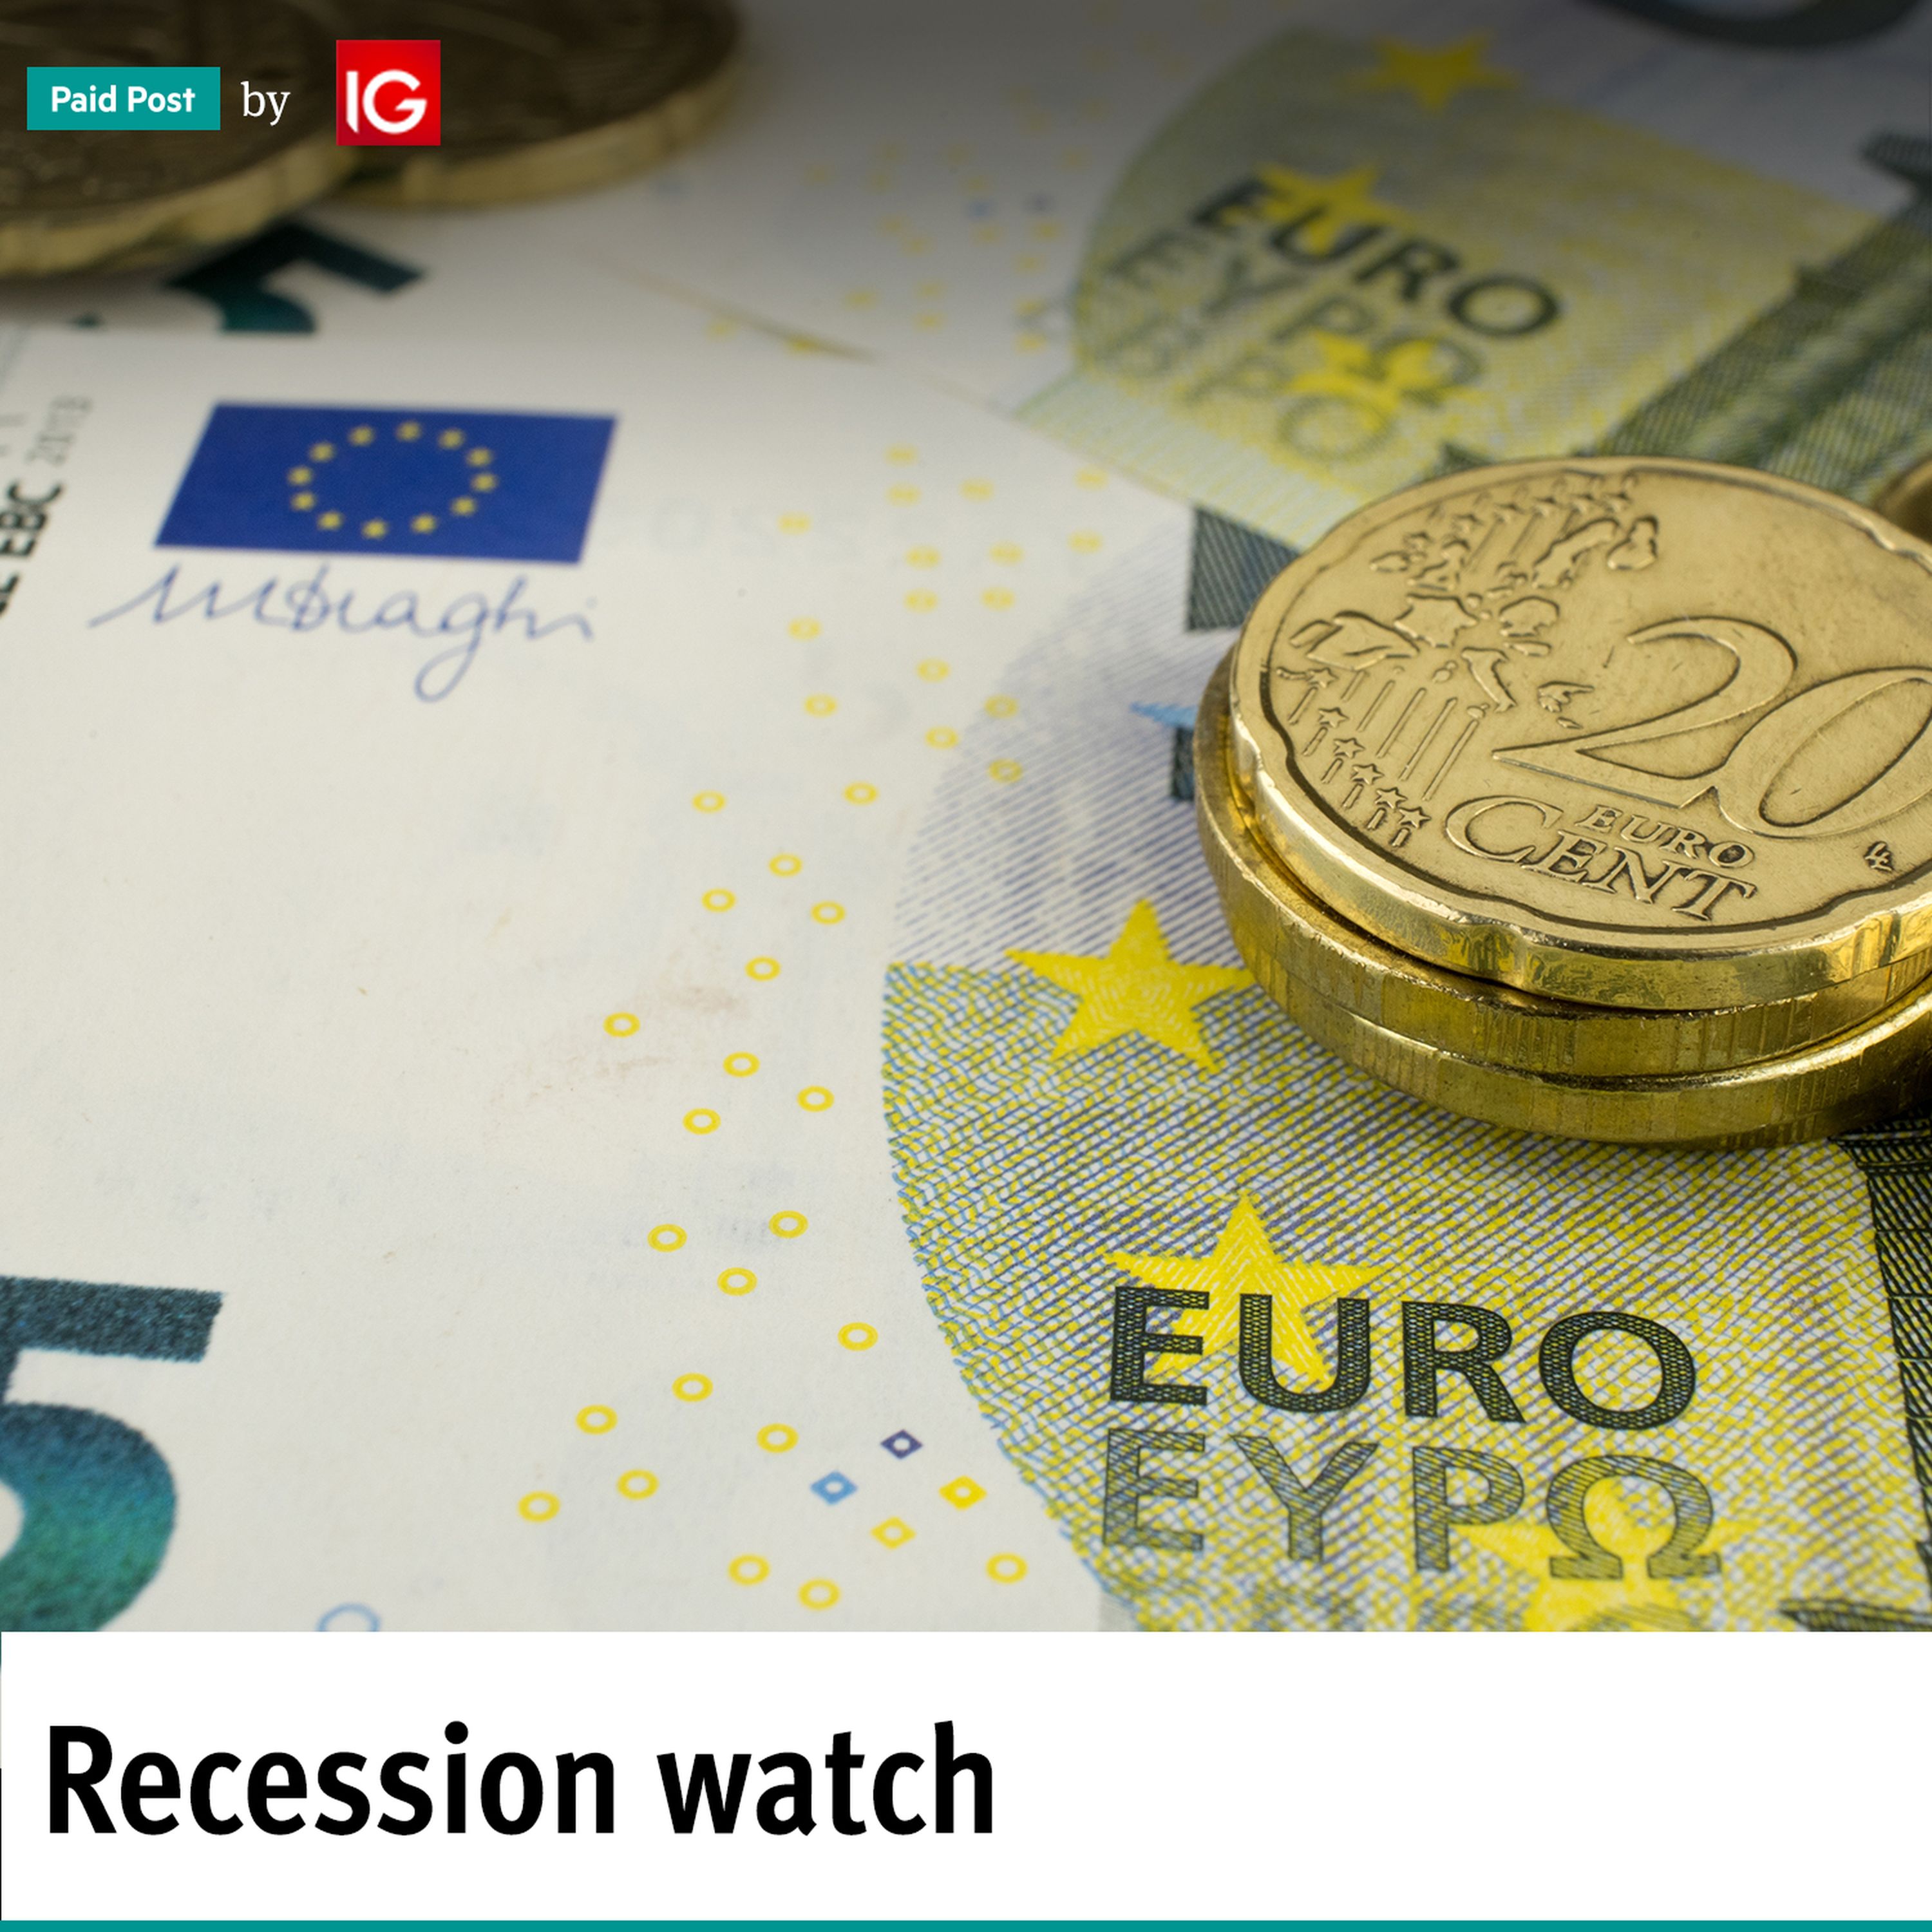 Paid Post: Recession watch – part 4